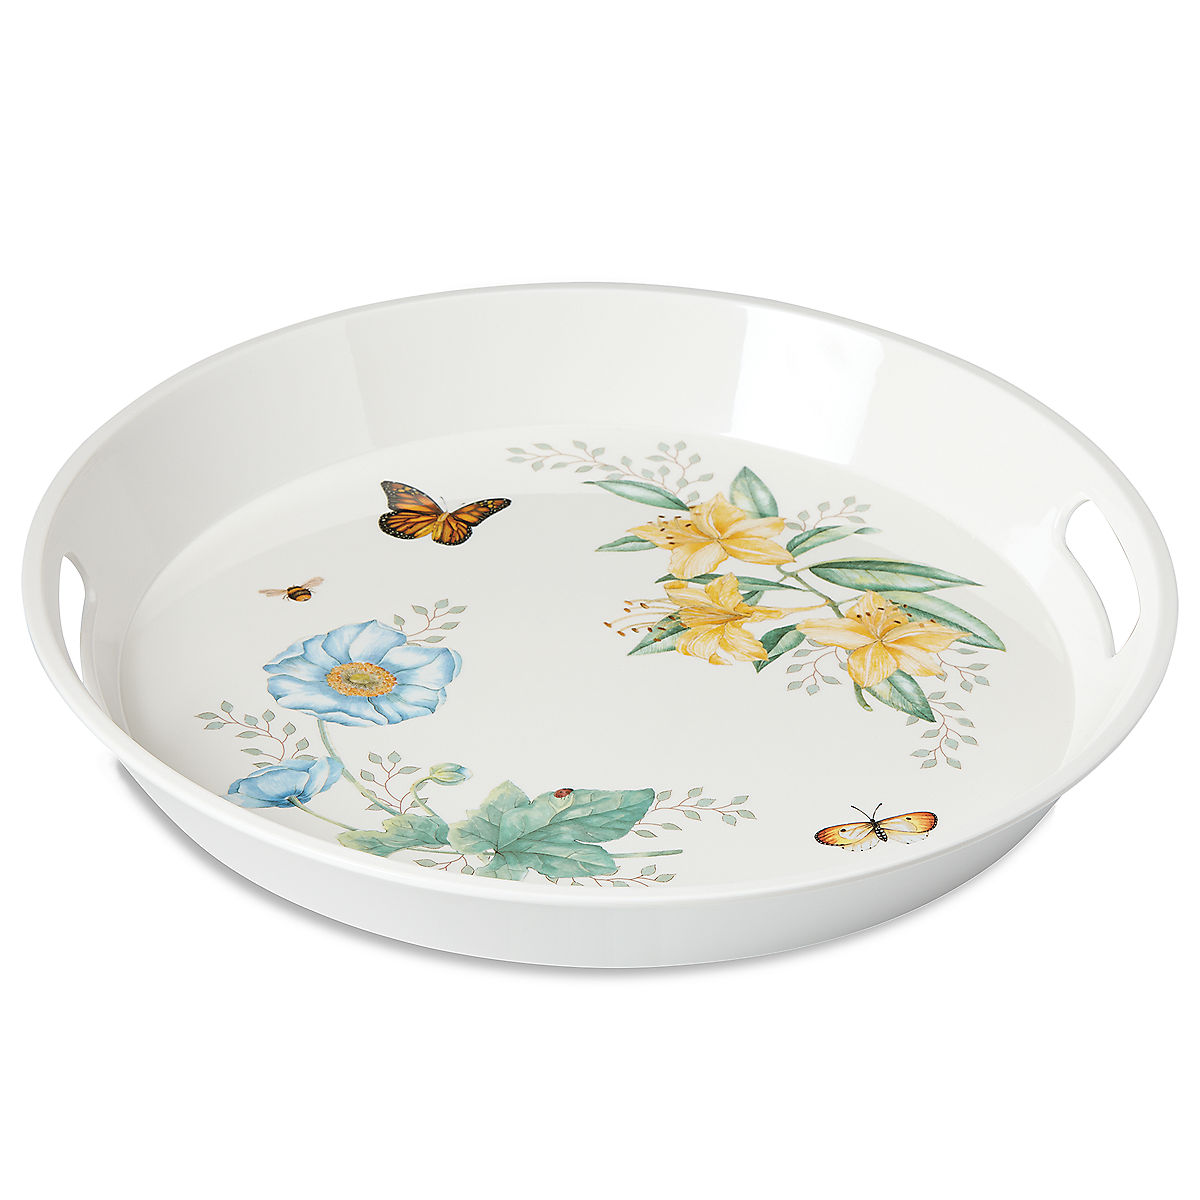 Picture of Lenox 865999 Butterfly Meadow Melamine Dinnerware Large Round Tray, 15